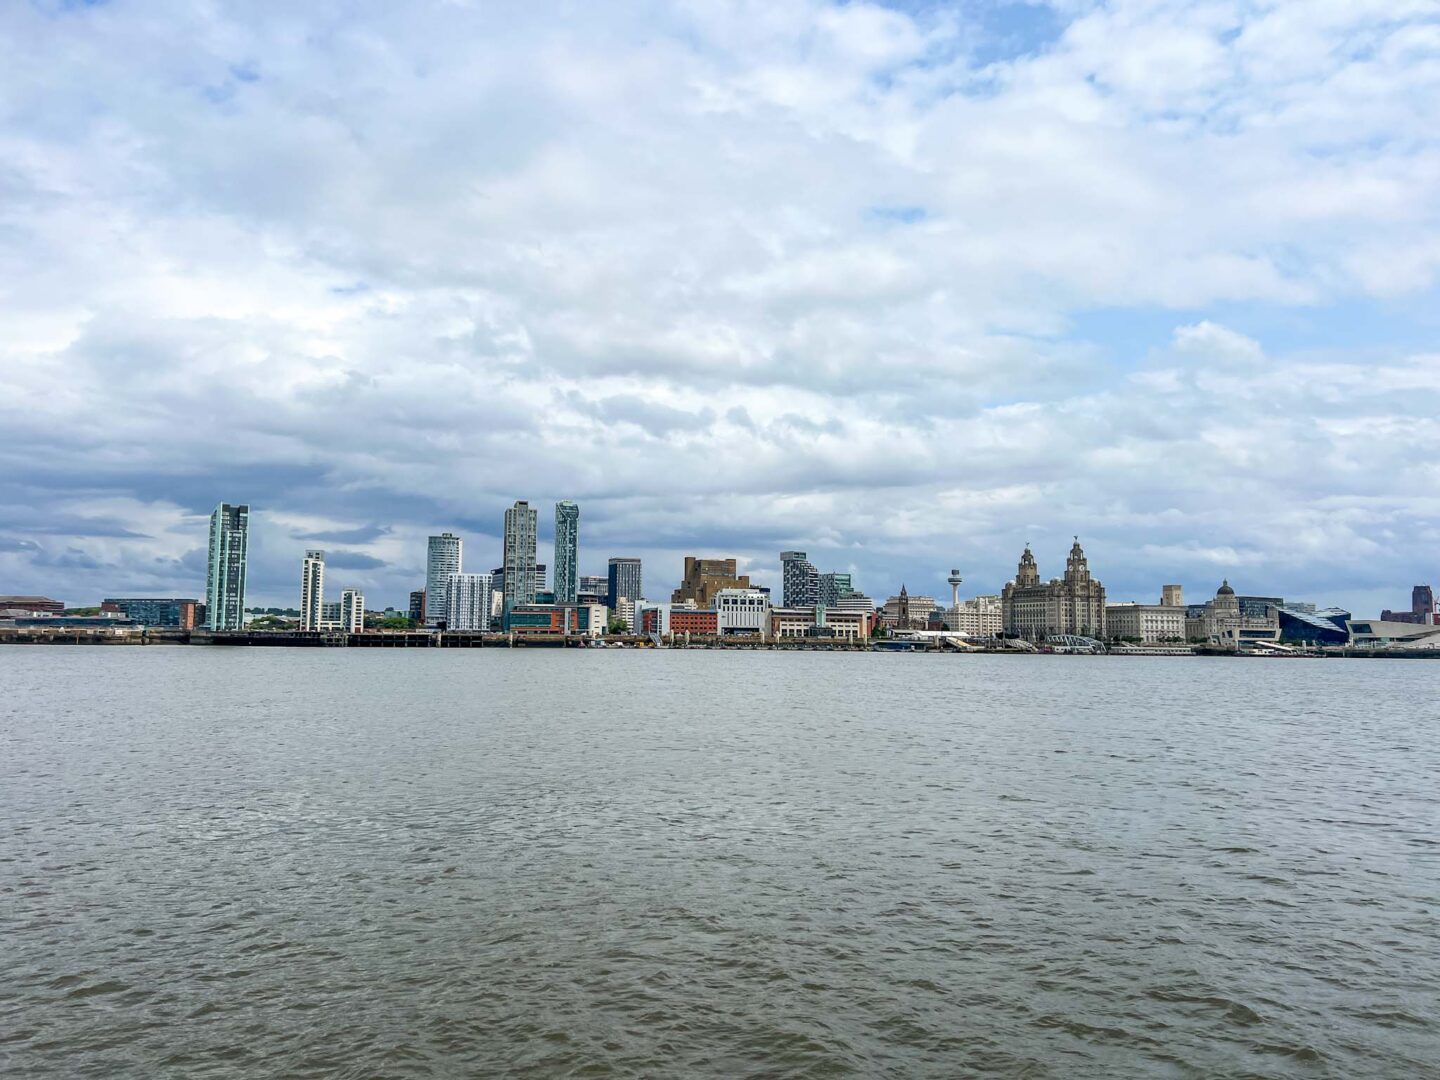 One day in Liverpool, Mersey Ferry view of Liverpool City 